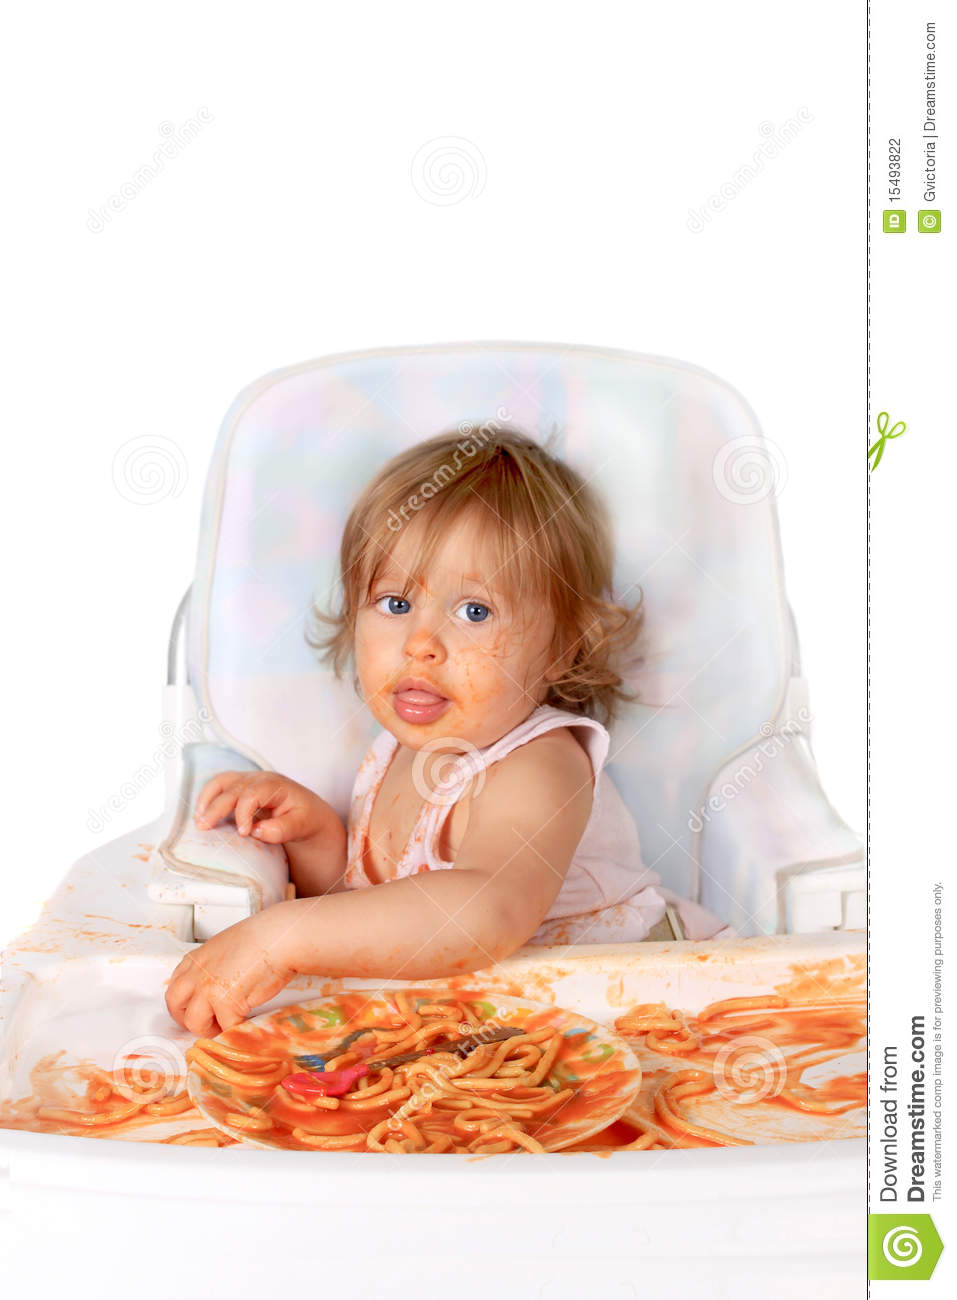 Young Blue Eyed Baby Girl Making A Mess With Spaghetti In Tomato Sauce